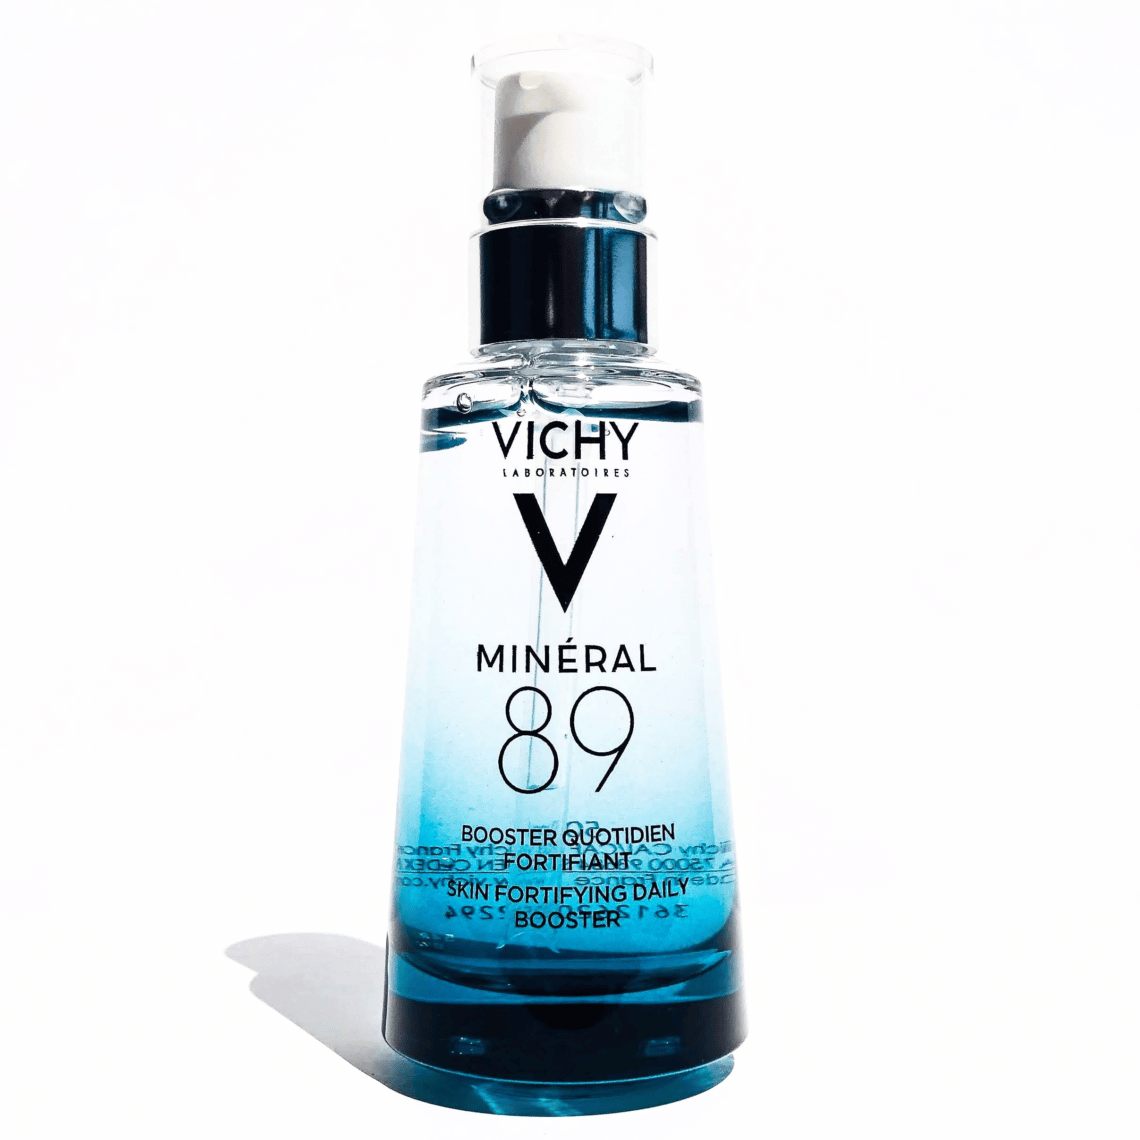 Vichy-Mineral-89-Review